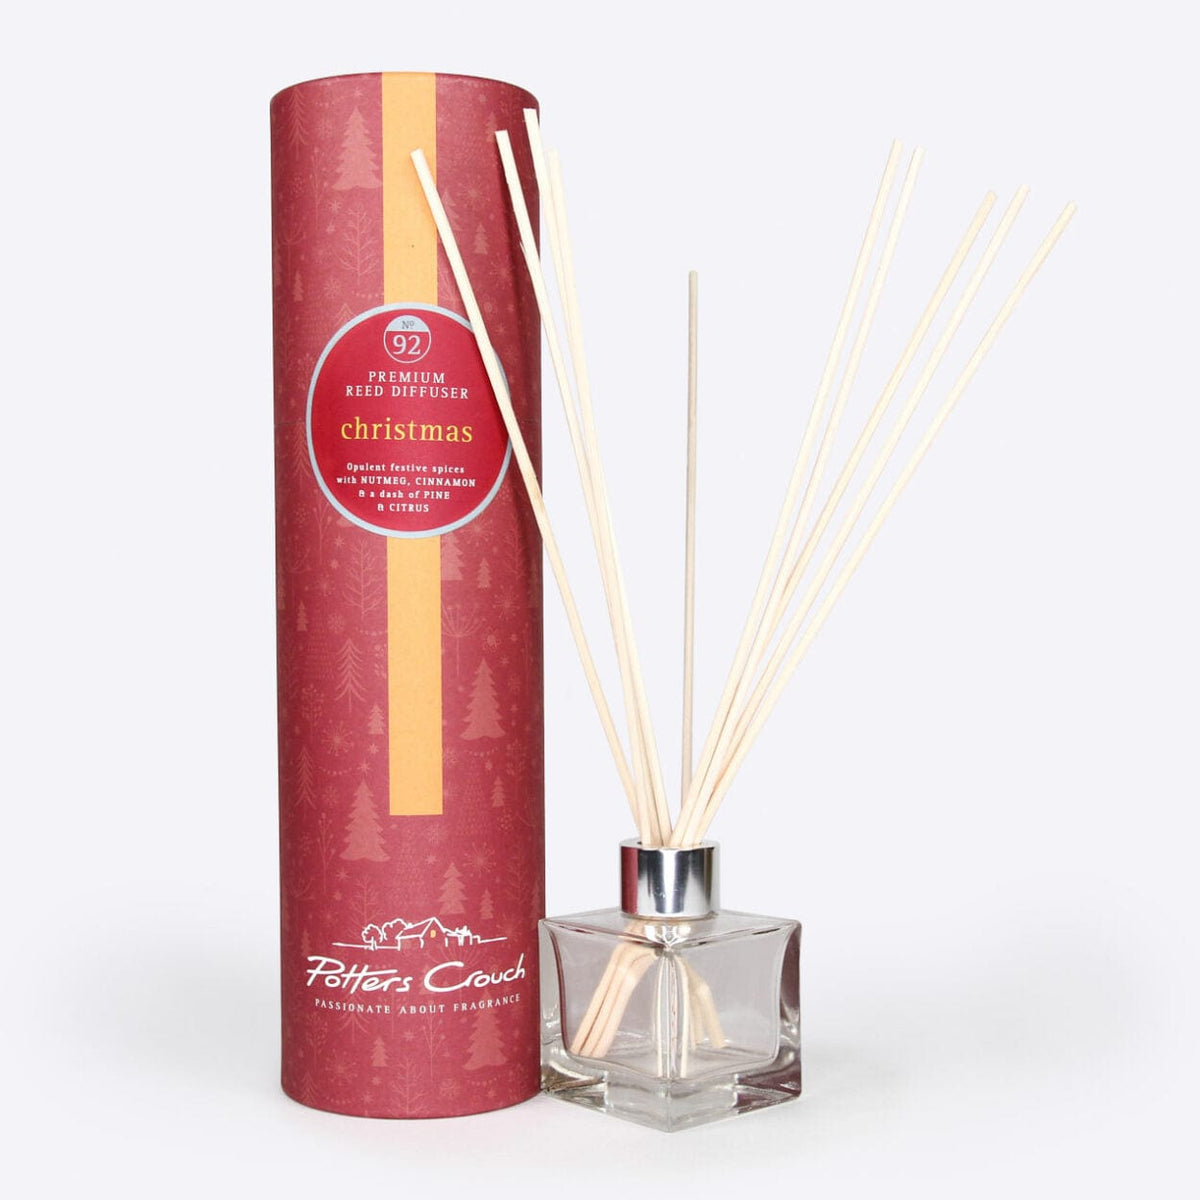 Potters Crouch Christmas Scented Reed Diffuser